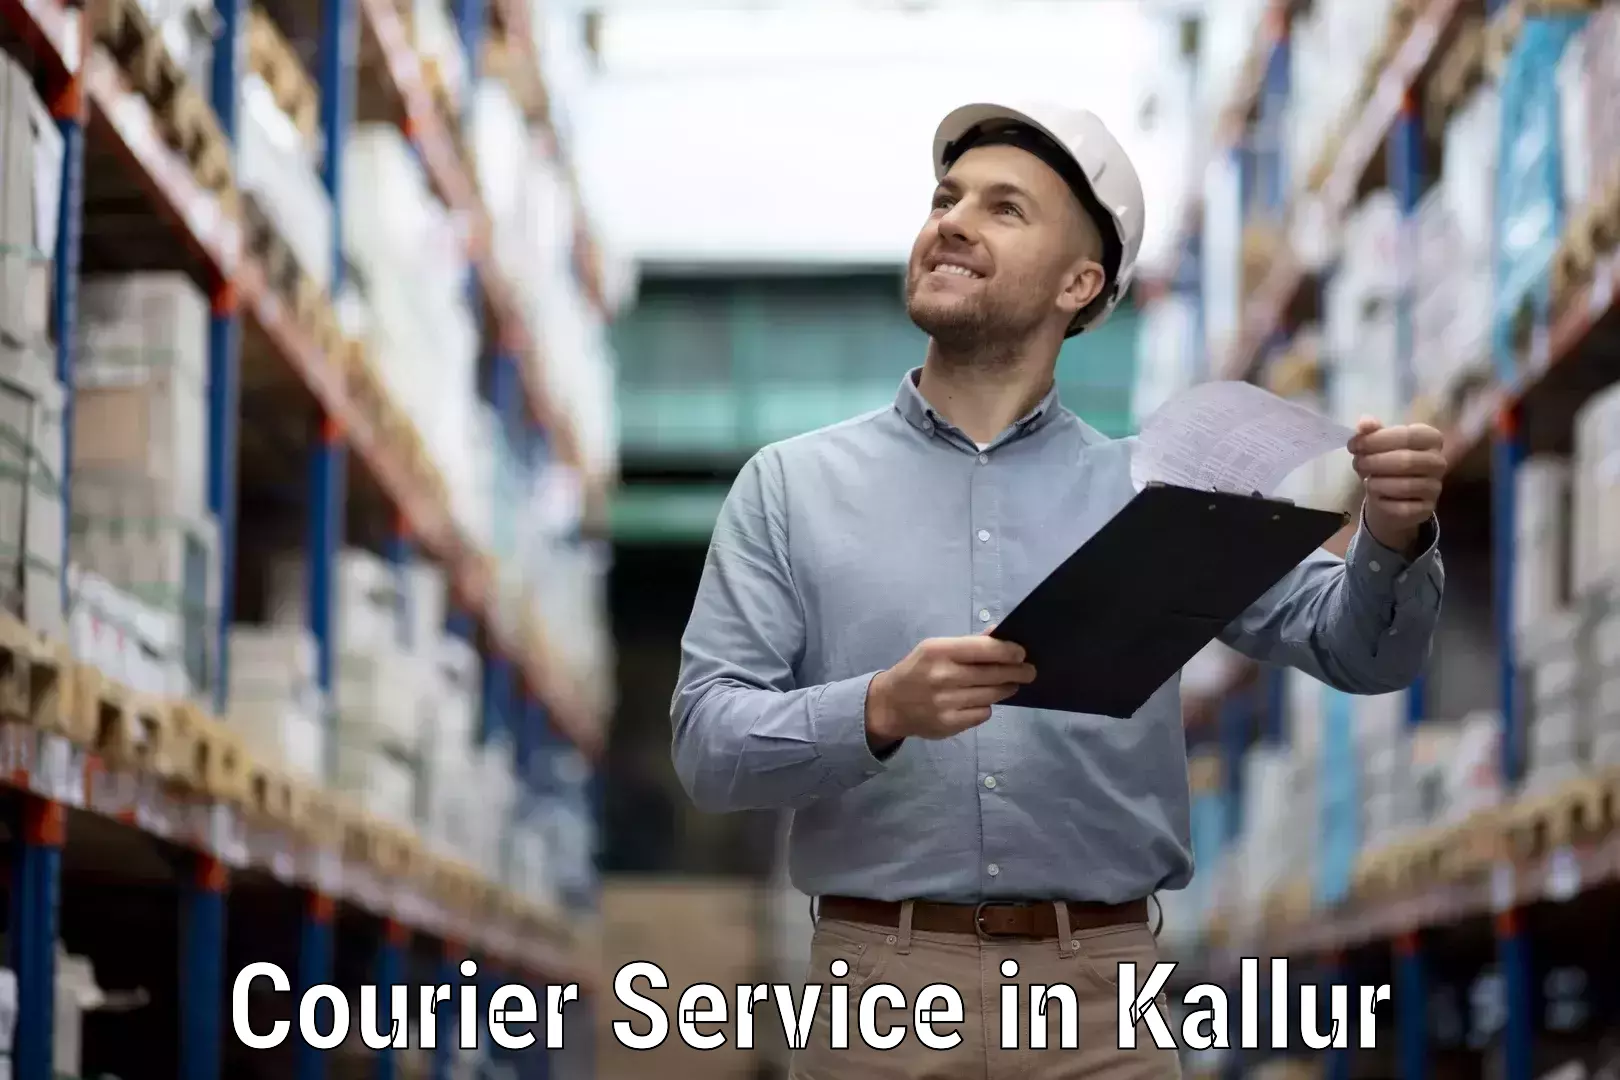 Cash on delivery service in Kallur